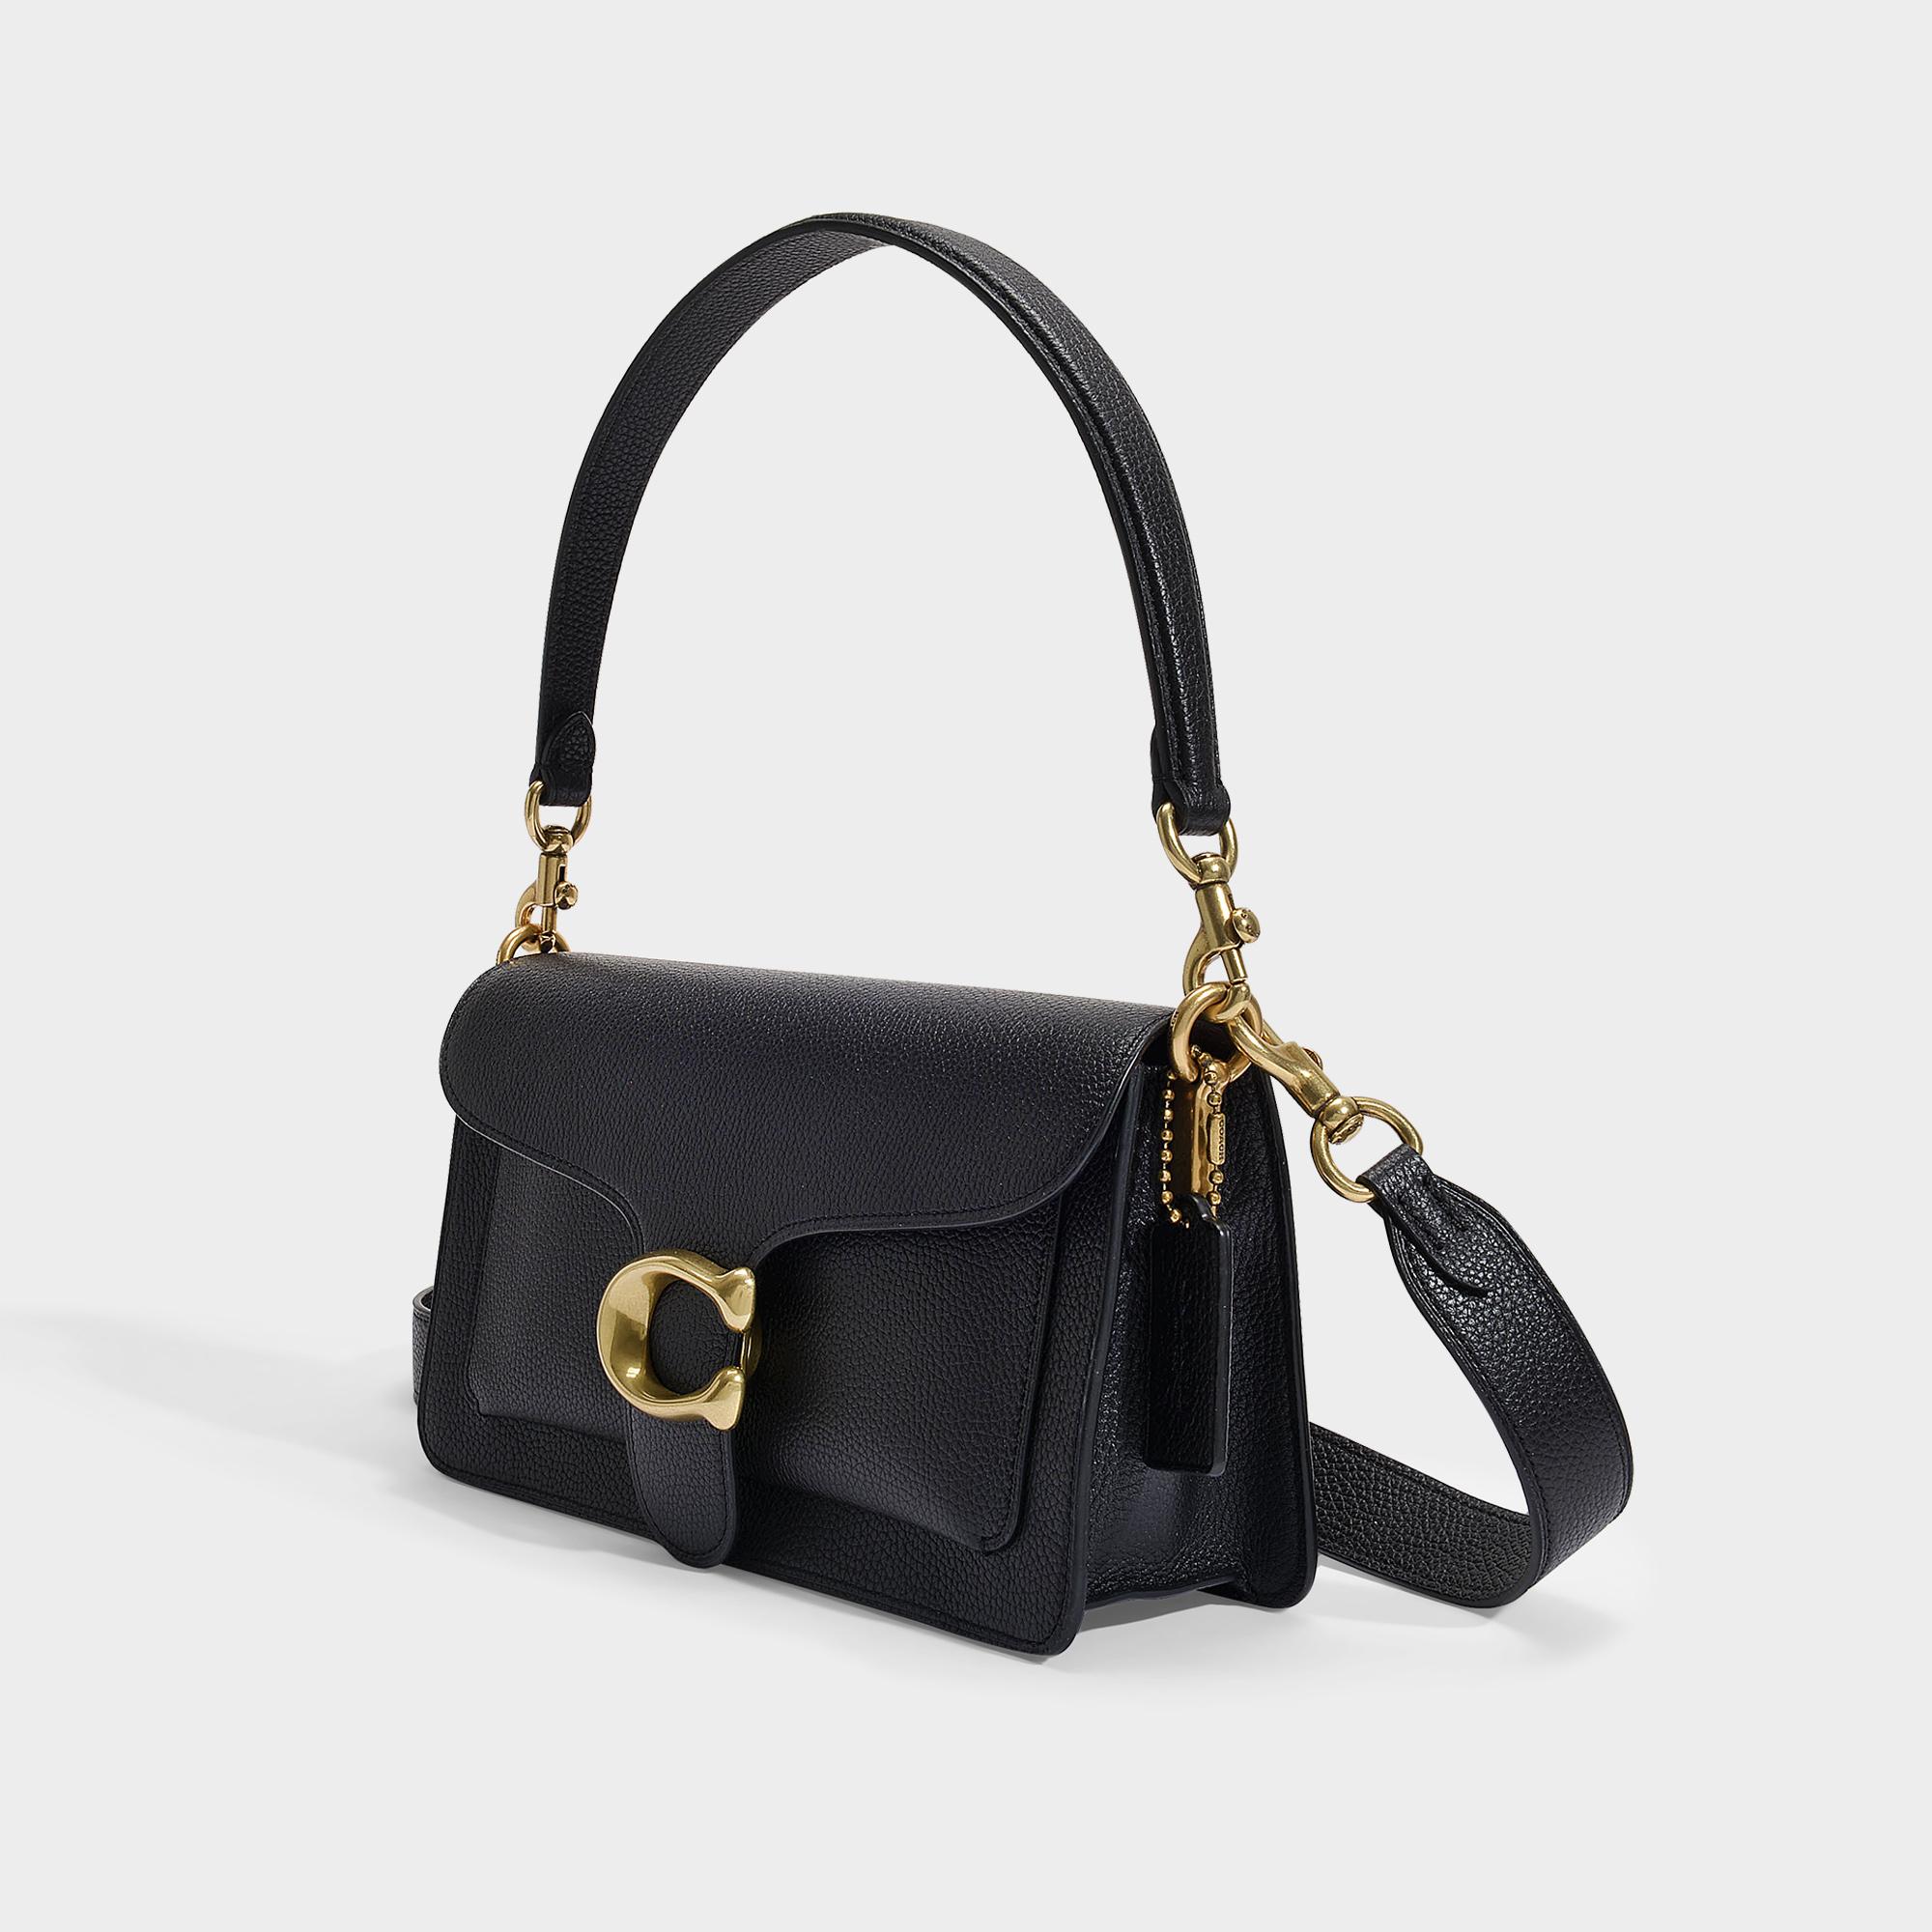 COACH Small Tabby Bag In Black Polished Pebble Leather in Black - Lyst